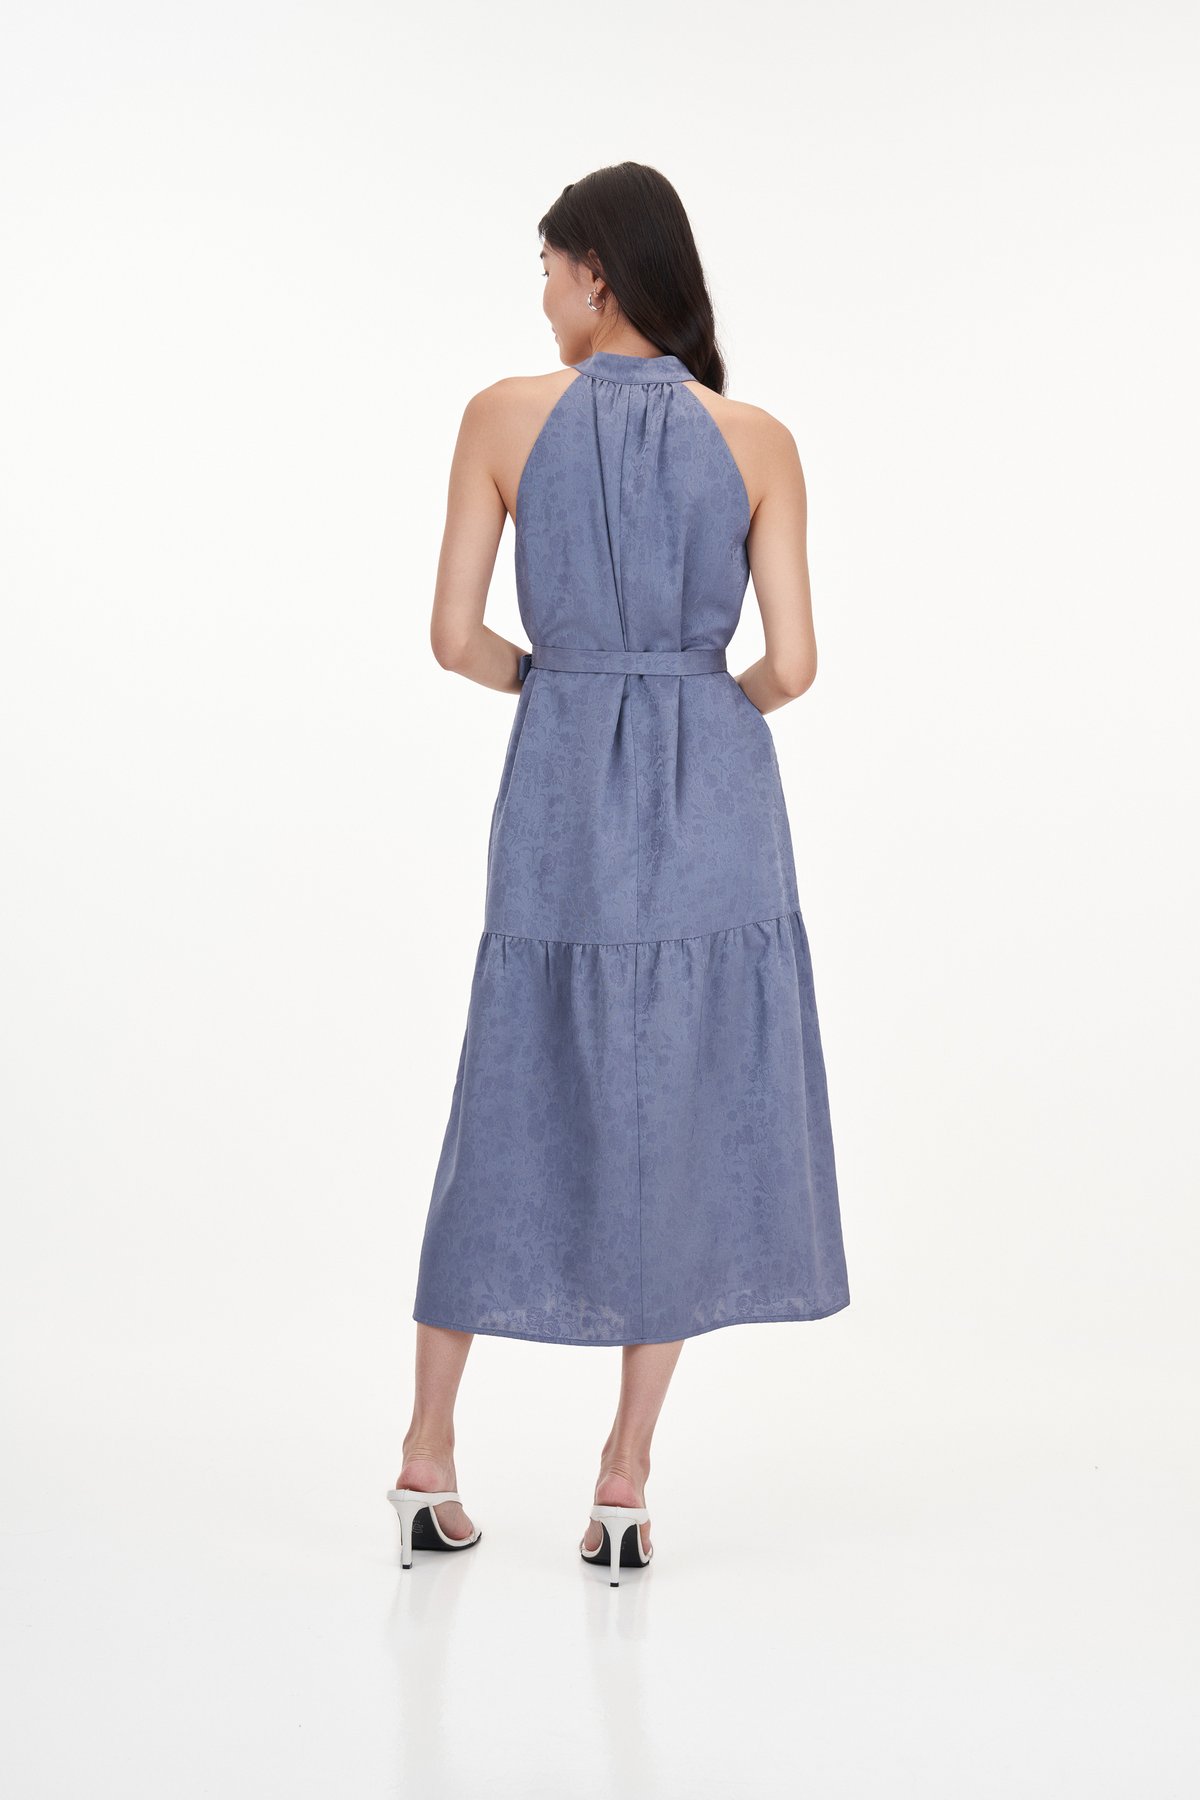 Fay Baroque Midaxi Dress in Periwinkle